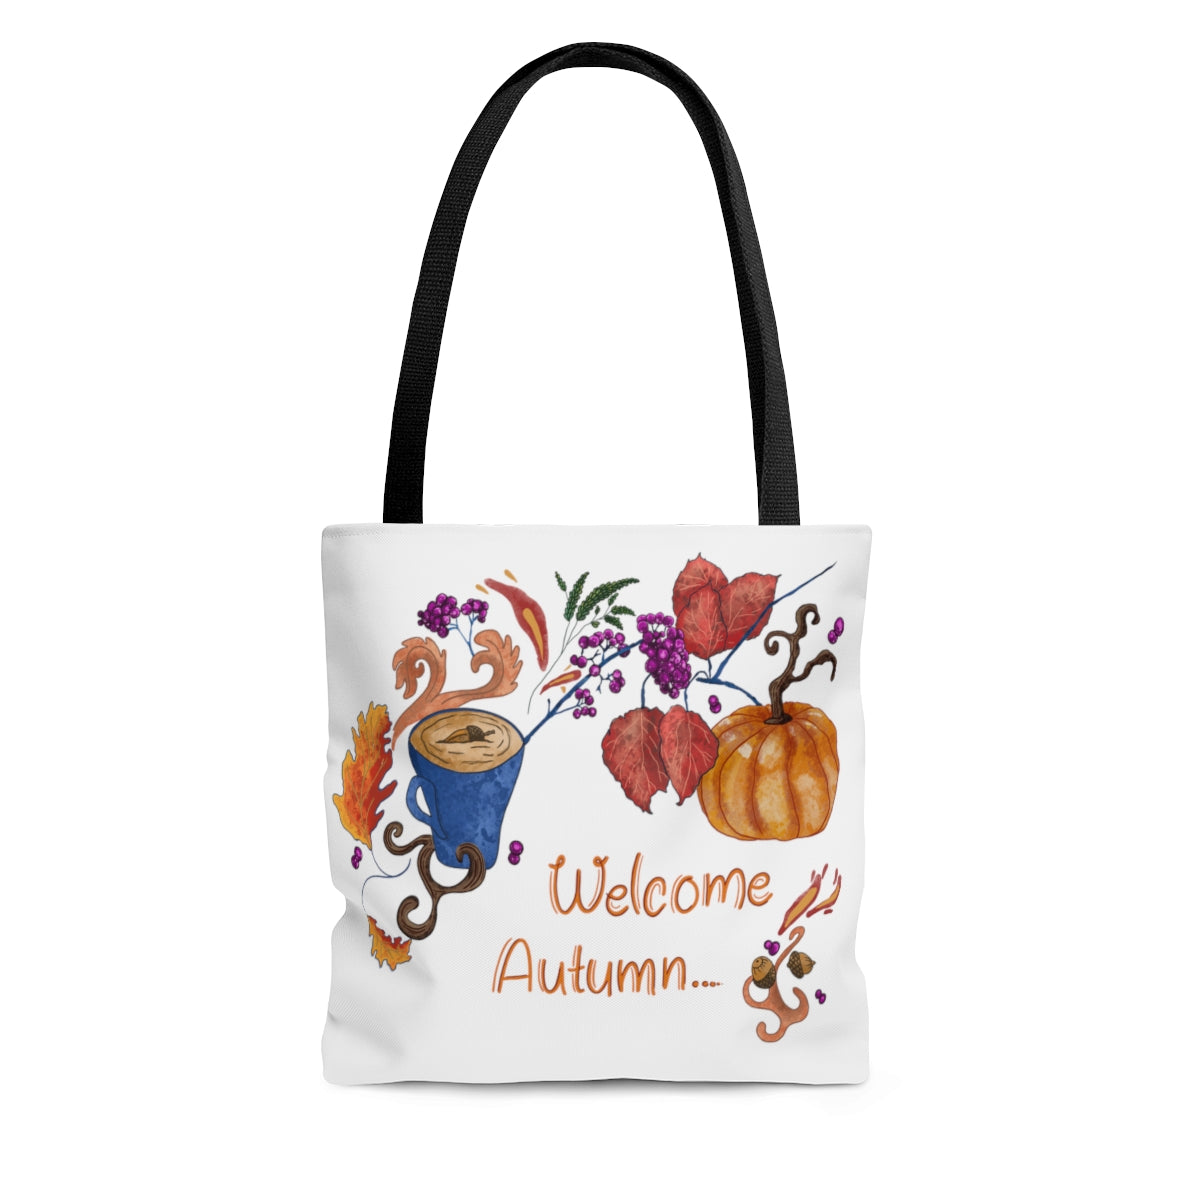 Welcome Autumn/اهلا بالخريف- AOP Tote Bag - Arabic and English